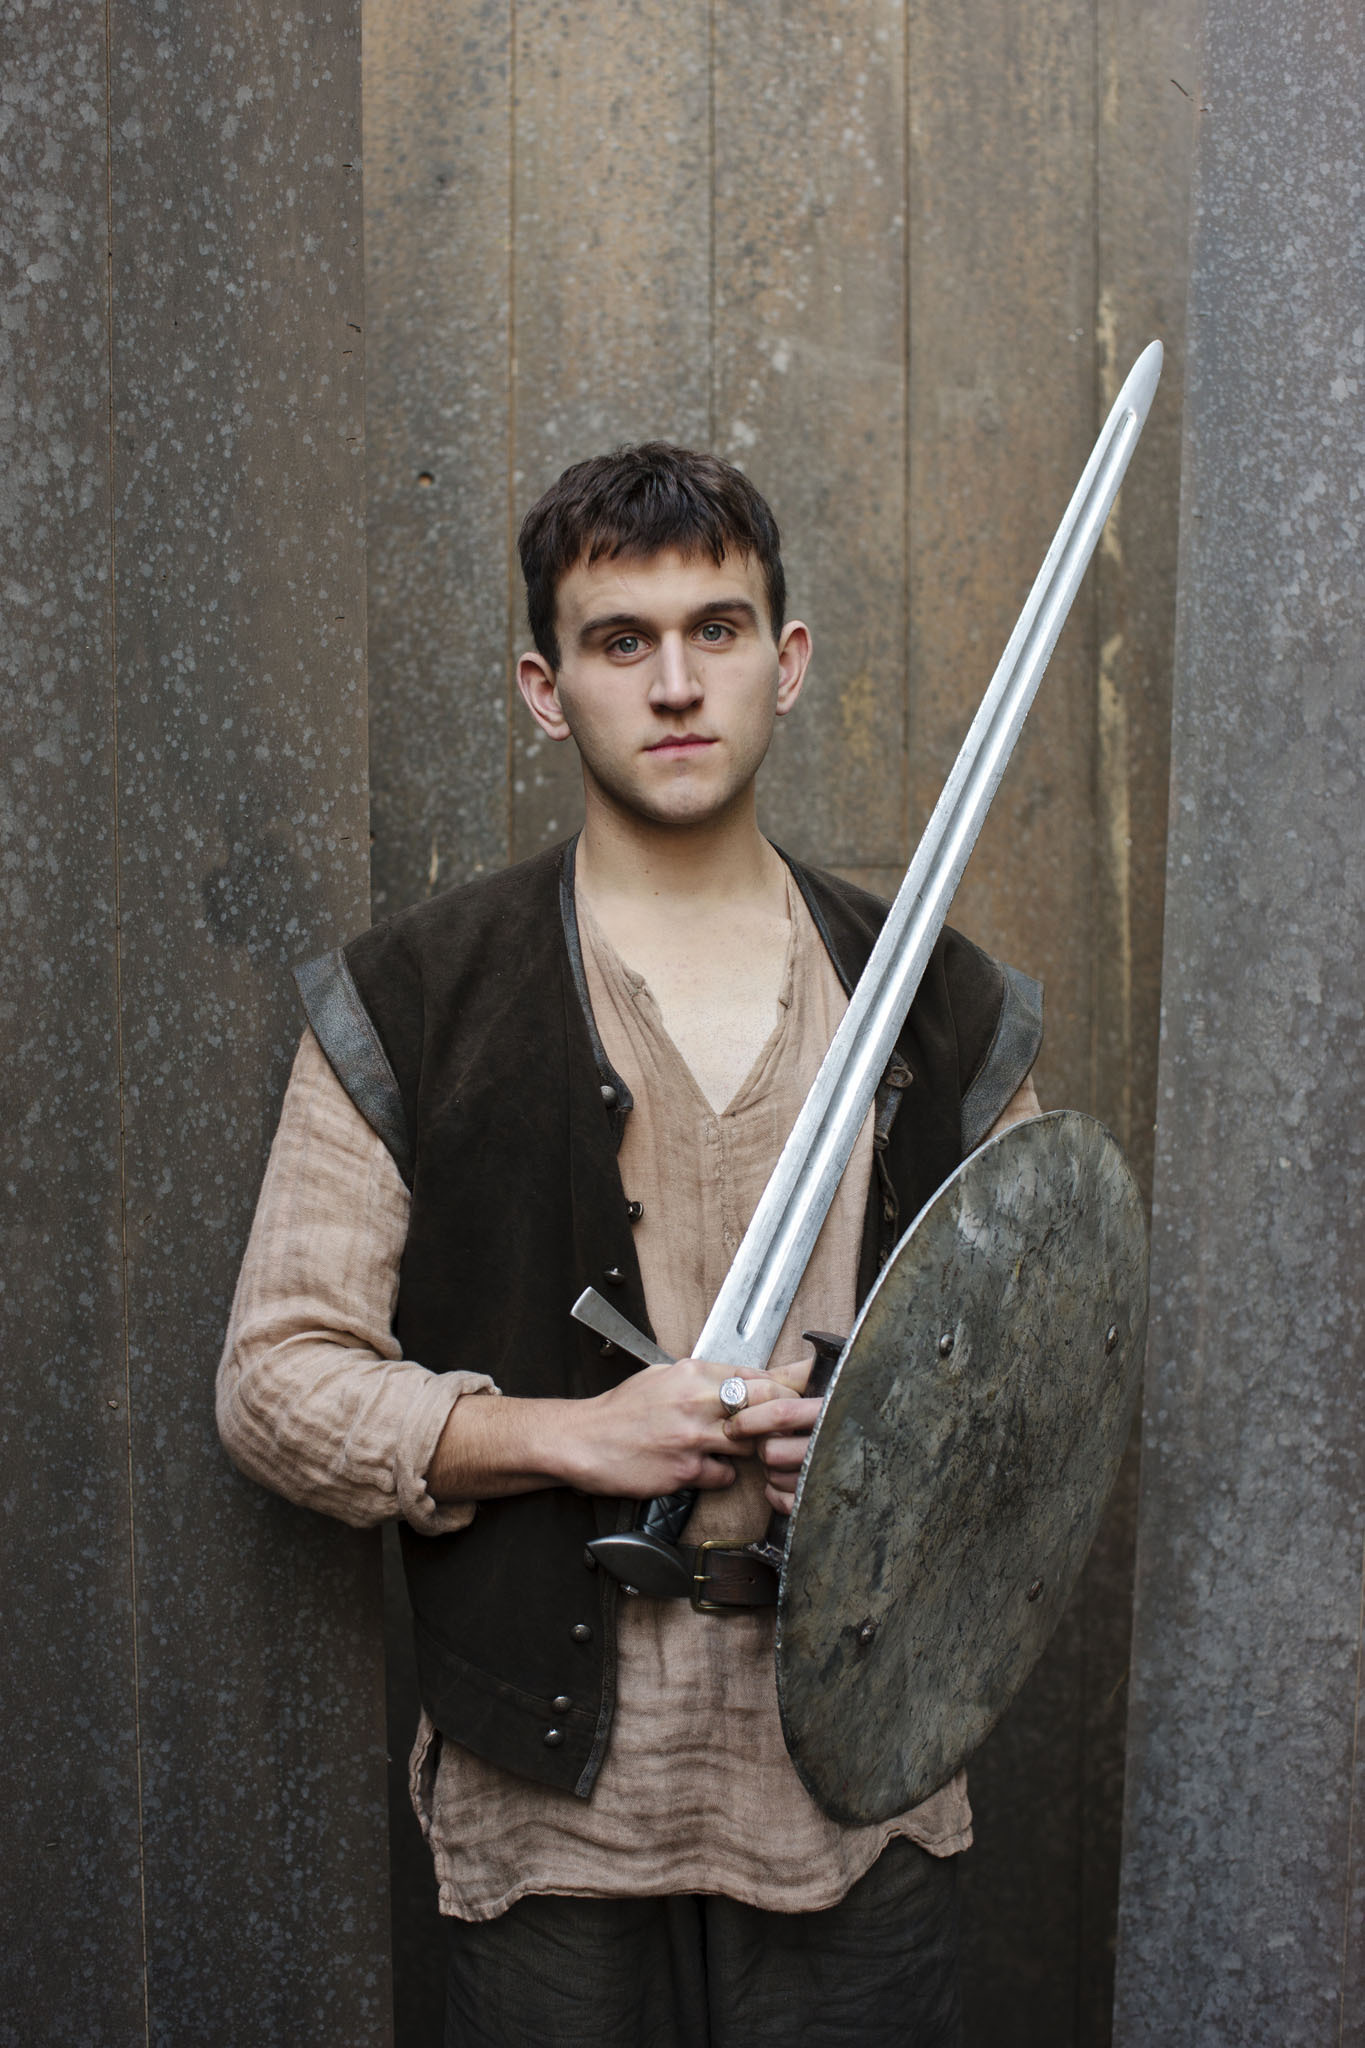 merlin on bbc, images, image, wallpaper, photos, photo, photograph, gallery...